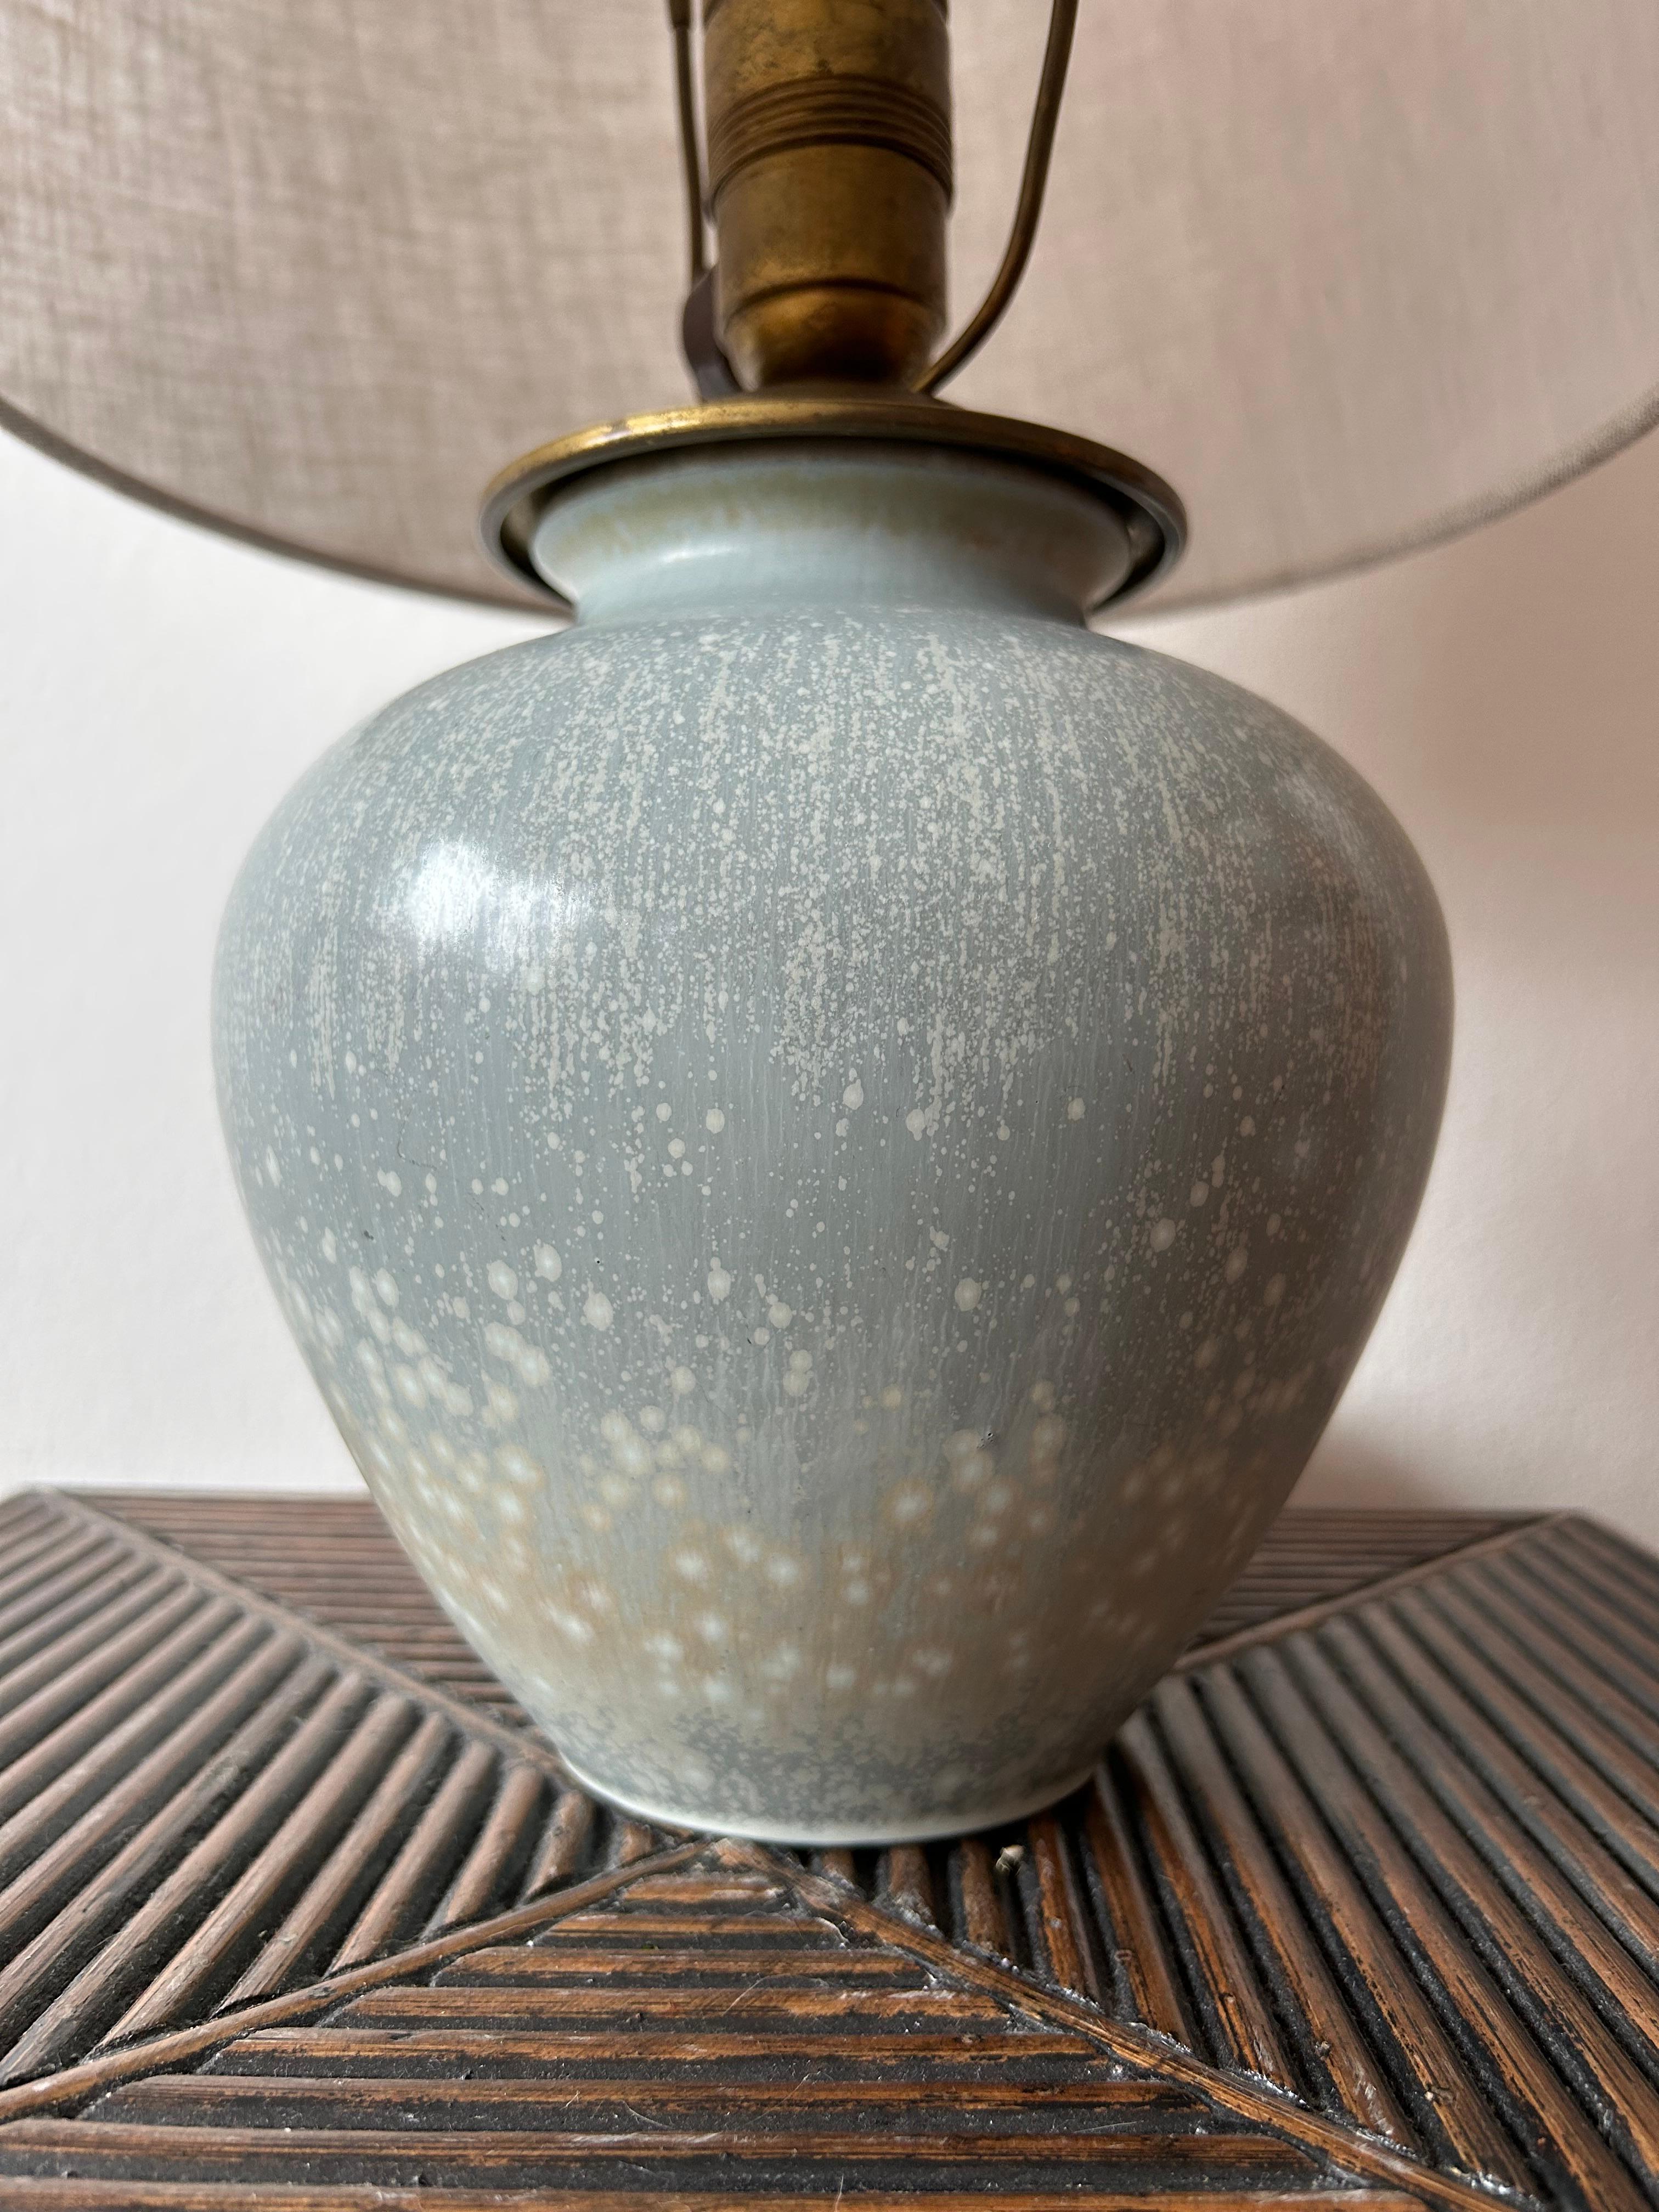 Rare Gunnar Nylund ceramic table lamp made at the Rörstrand studio in Sweden in the 1950’s.

The lamp is in good condition with a beautiful glaze which gives a great structure and detail to the lamp, the lamp still has the original  bulb socket and